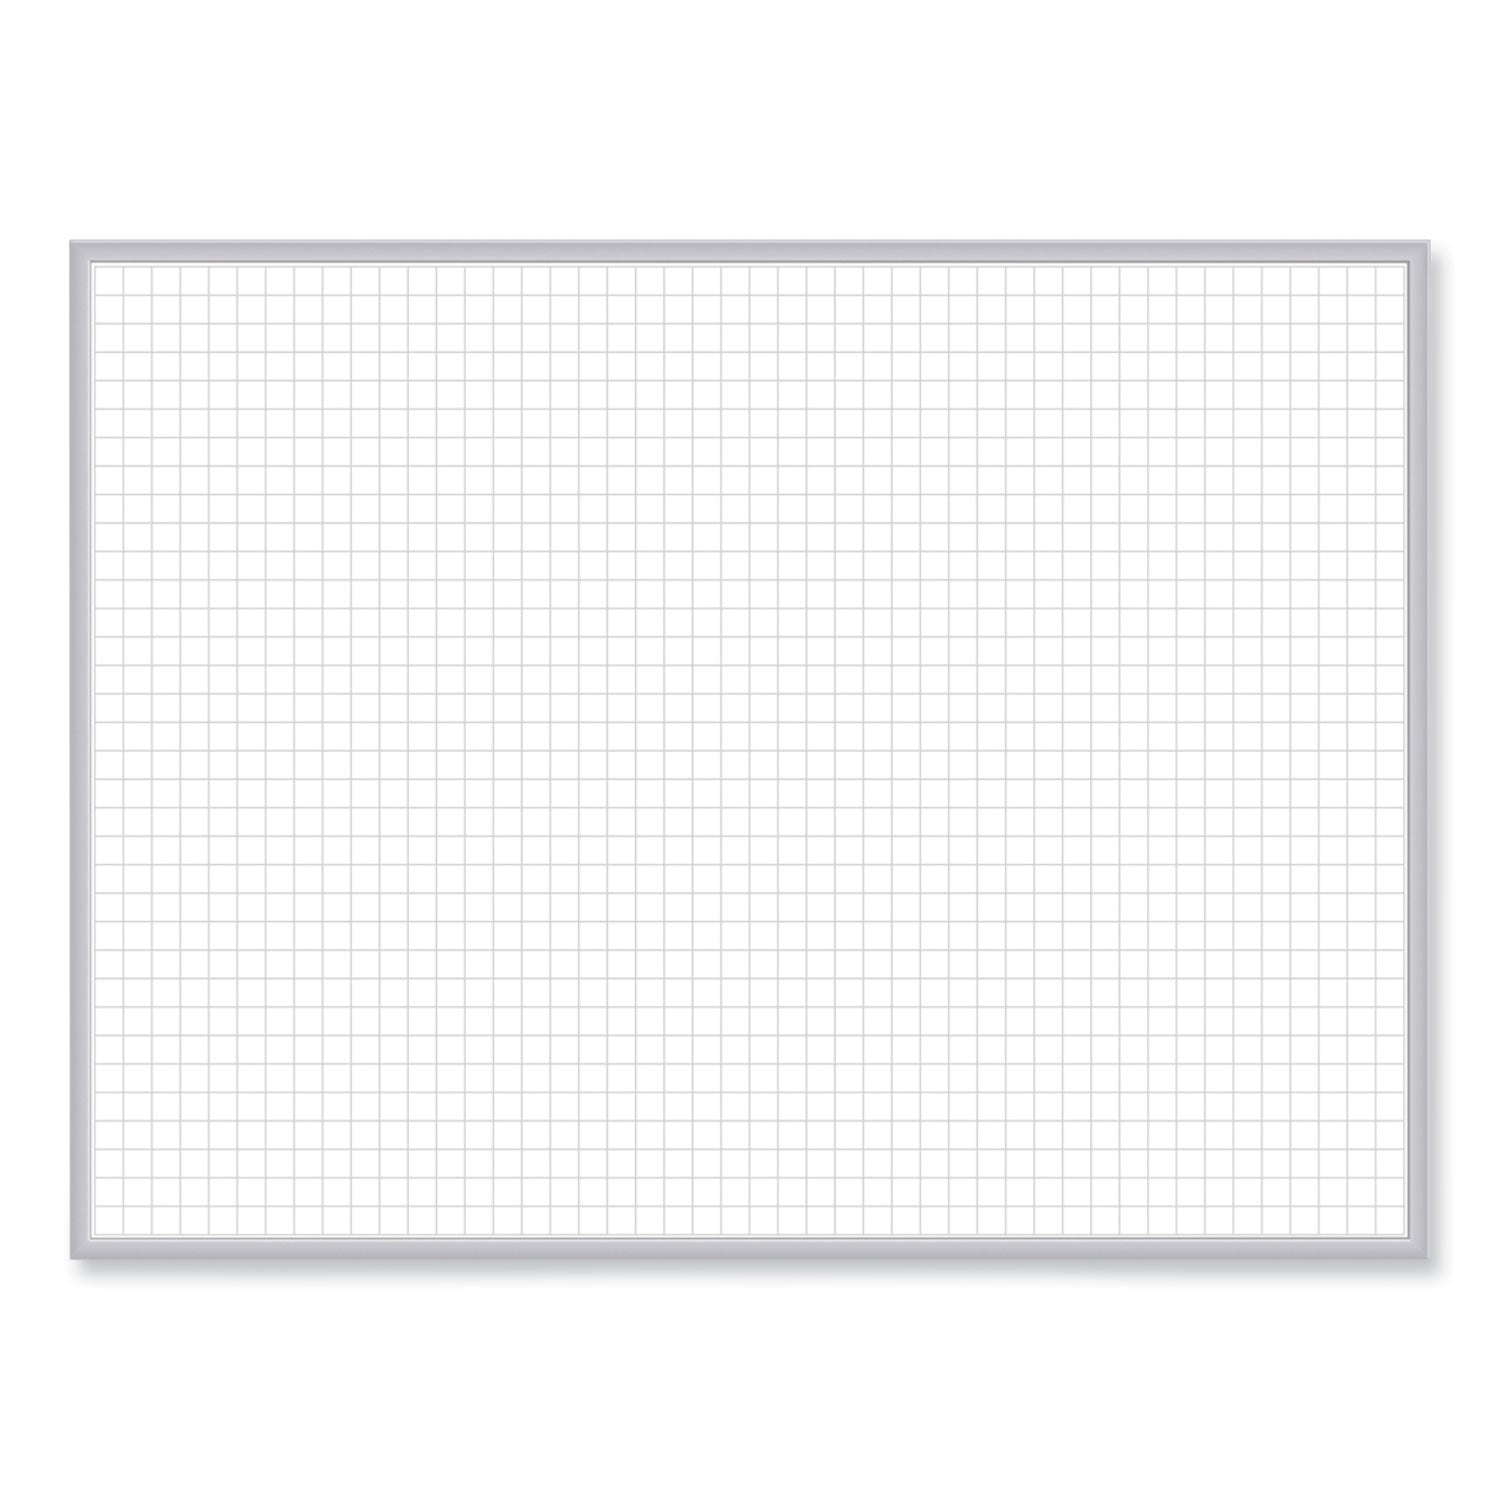 magnetic-porcelain-whiteboard-with-satin-aluminum-frame-365-x-605-white-surface-ships-in-7-10-business-days_ghem1354 - 1